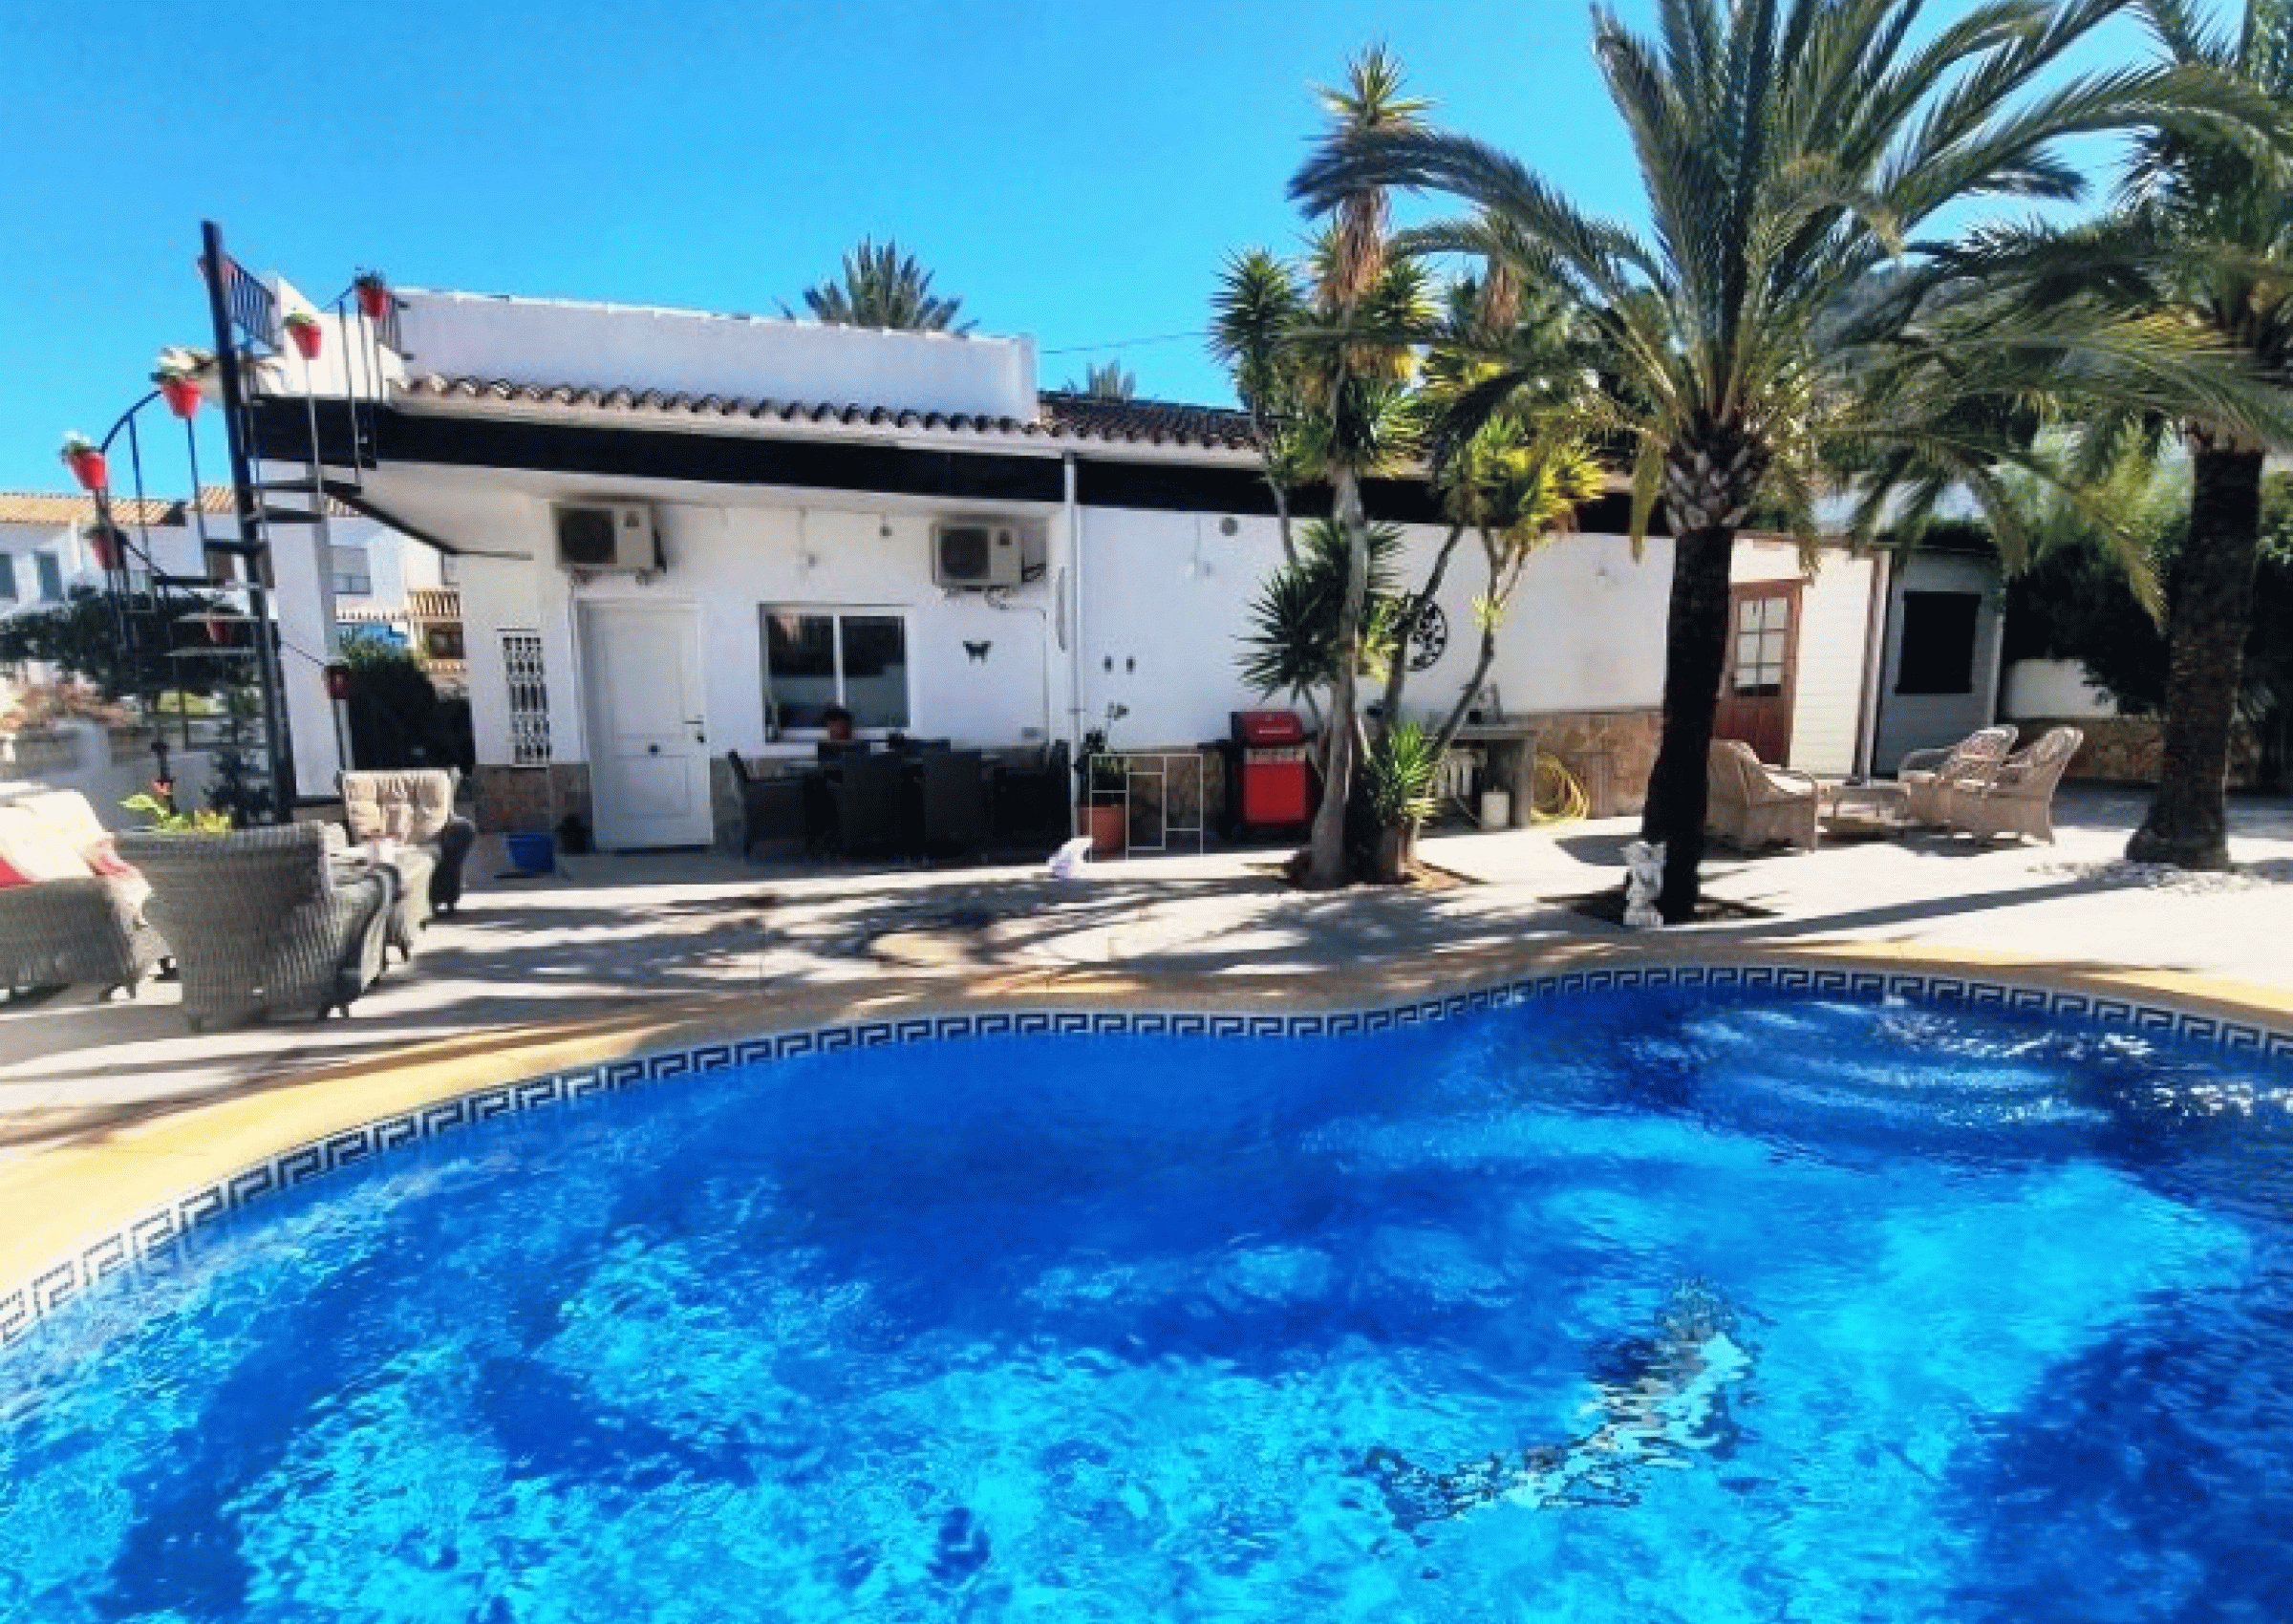 Well situated renovated 1 storey villa in Albir
CBB